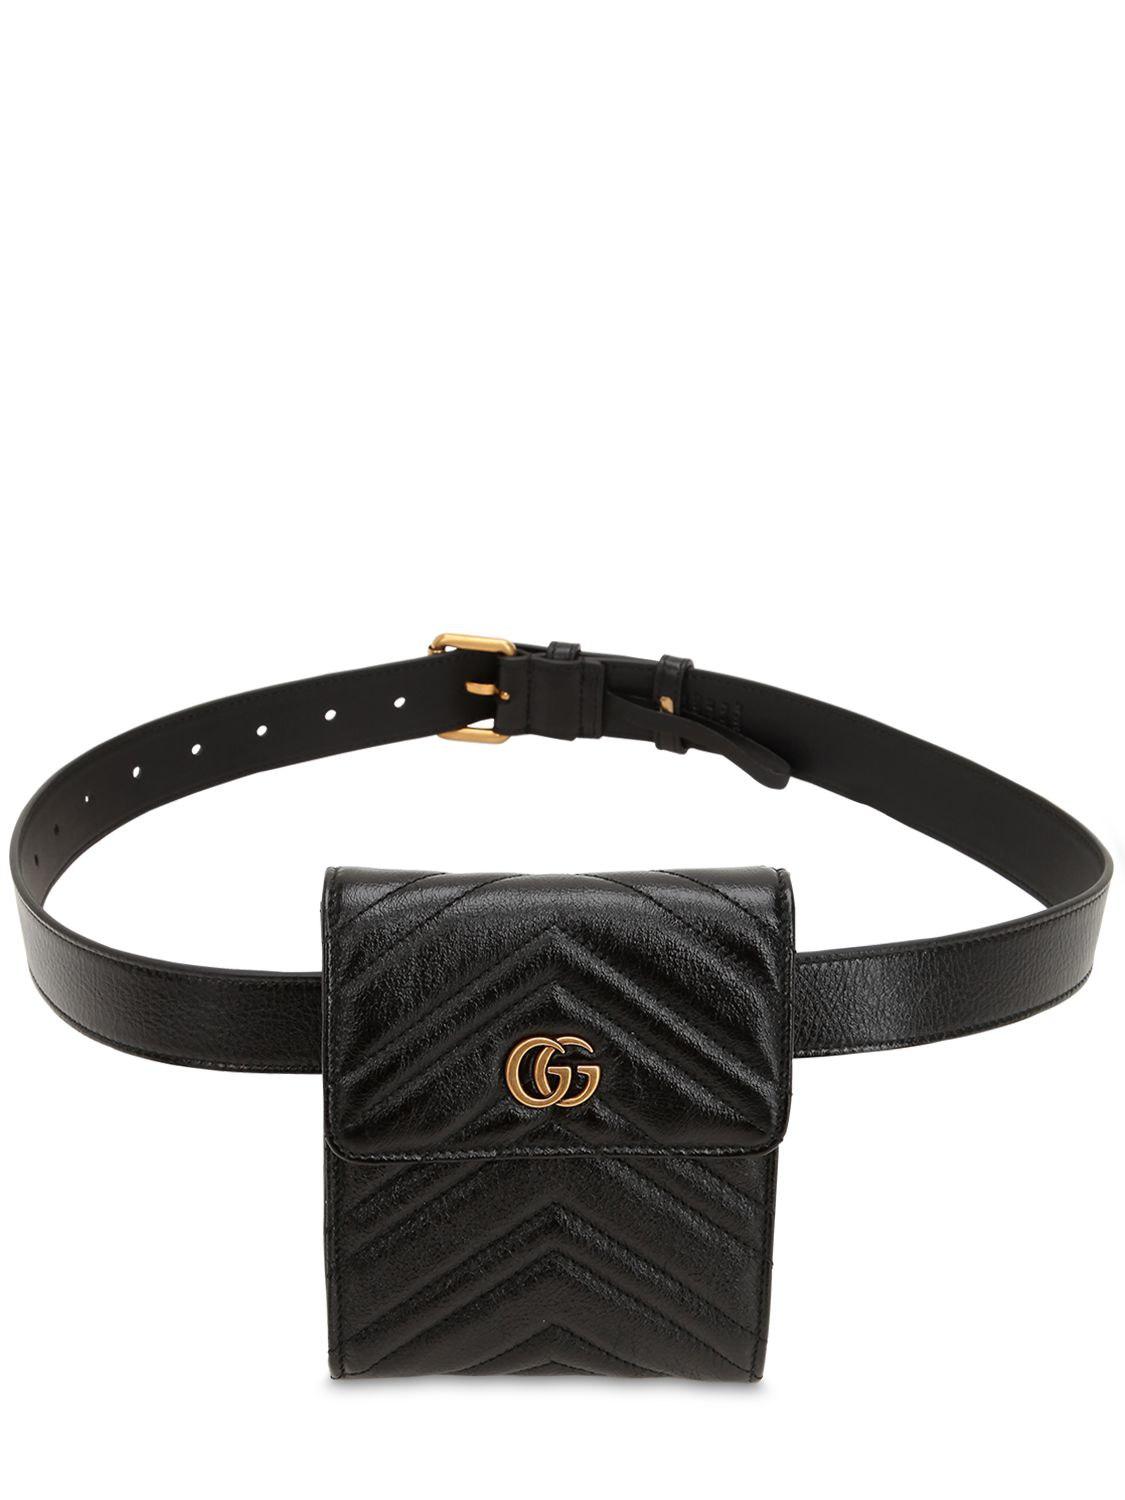 Lyst - Gucci Gg Marmont Leather Belt Pack in Black